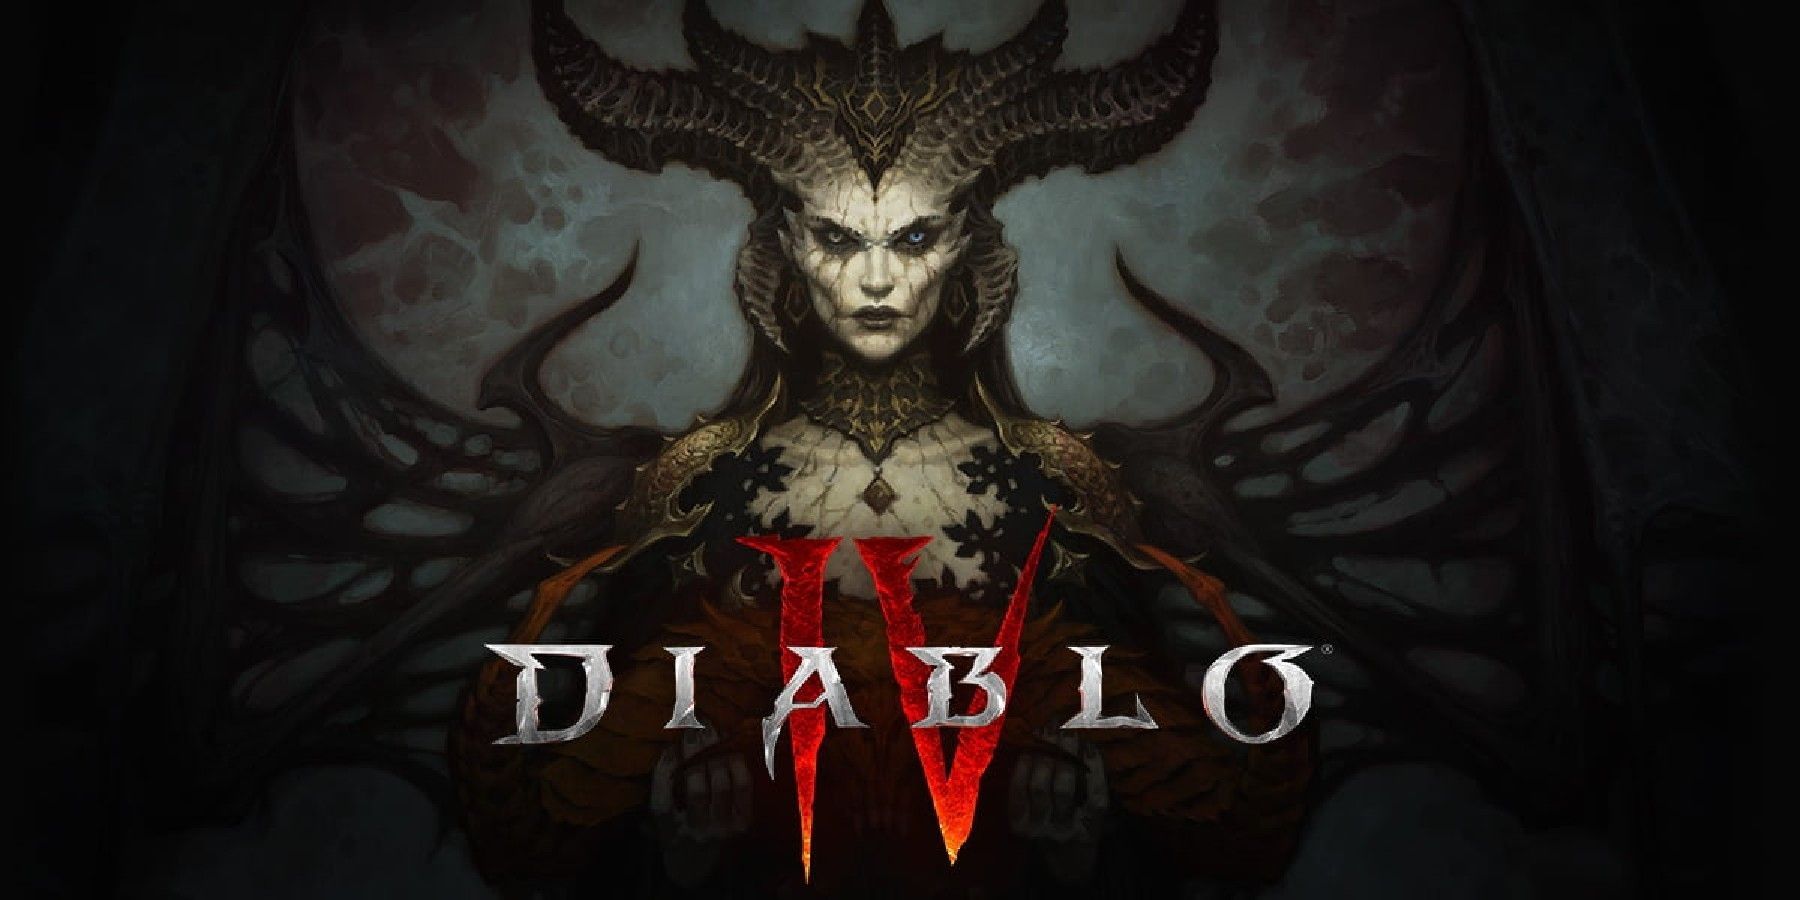 Diablo 4 is getting bombed reviews.